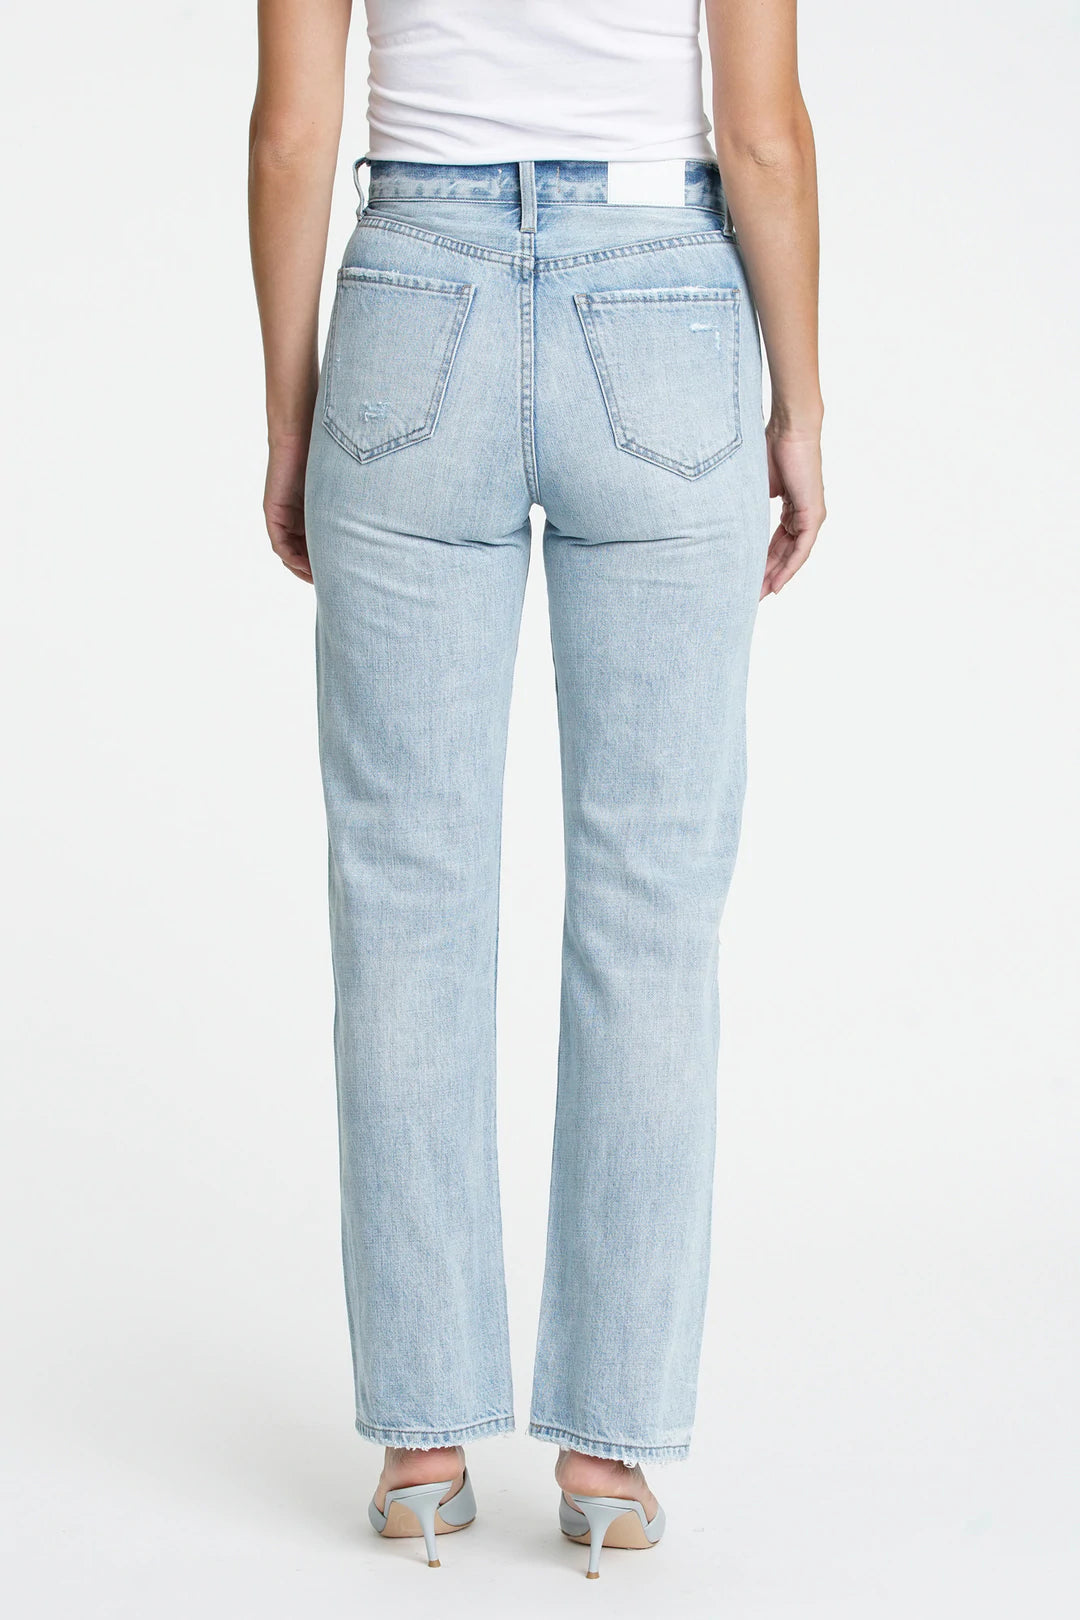 Cassie Super High Rise Jean in By My Side